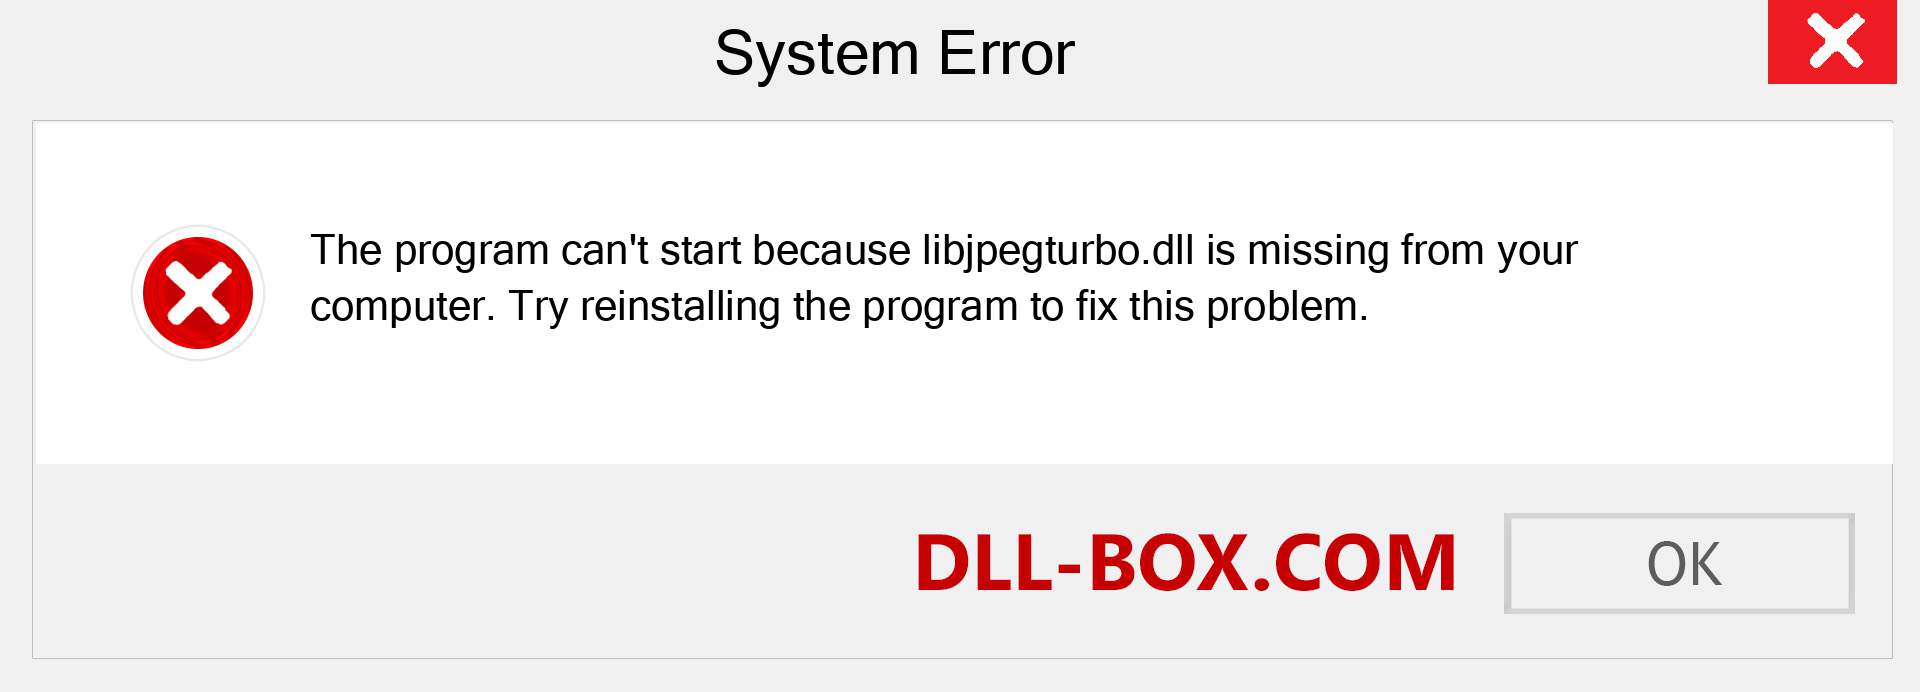  libjpegturbo.dll file is missing?. Download for Windows 7, 8, 10 - Fix  libjpegturbo dll Missing Error on Windows, photos, images